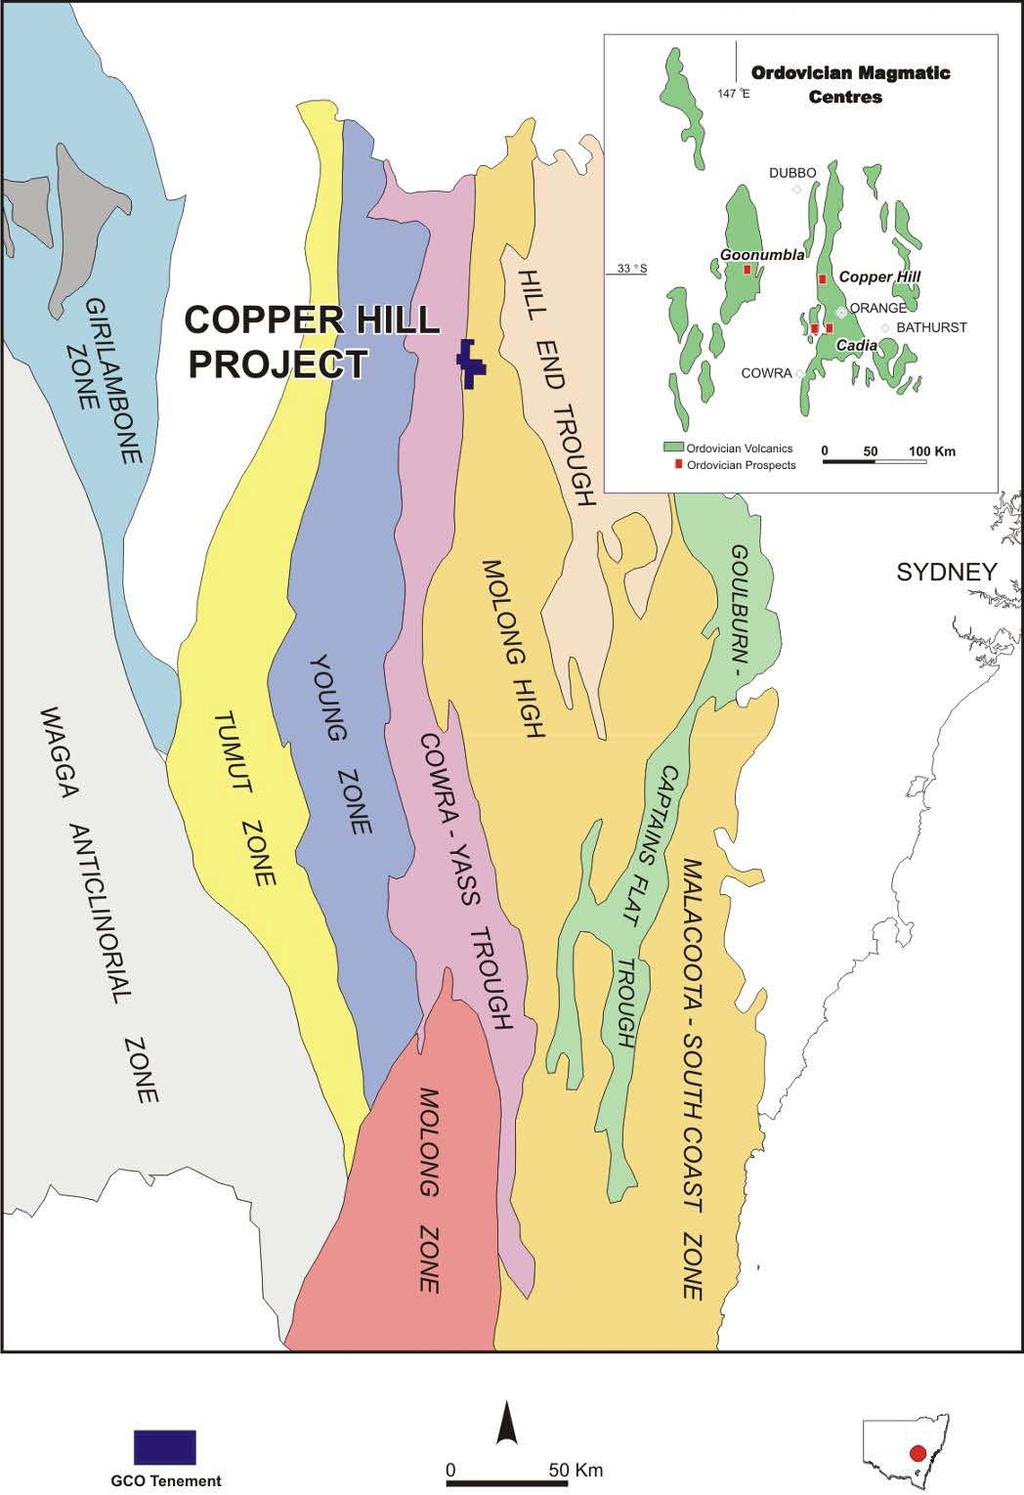 Tectonic setting of porphyry copper-gold mineralisation in the Macquarie Arc R.